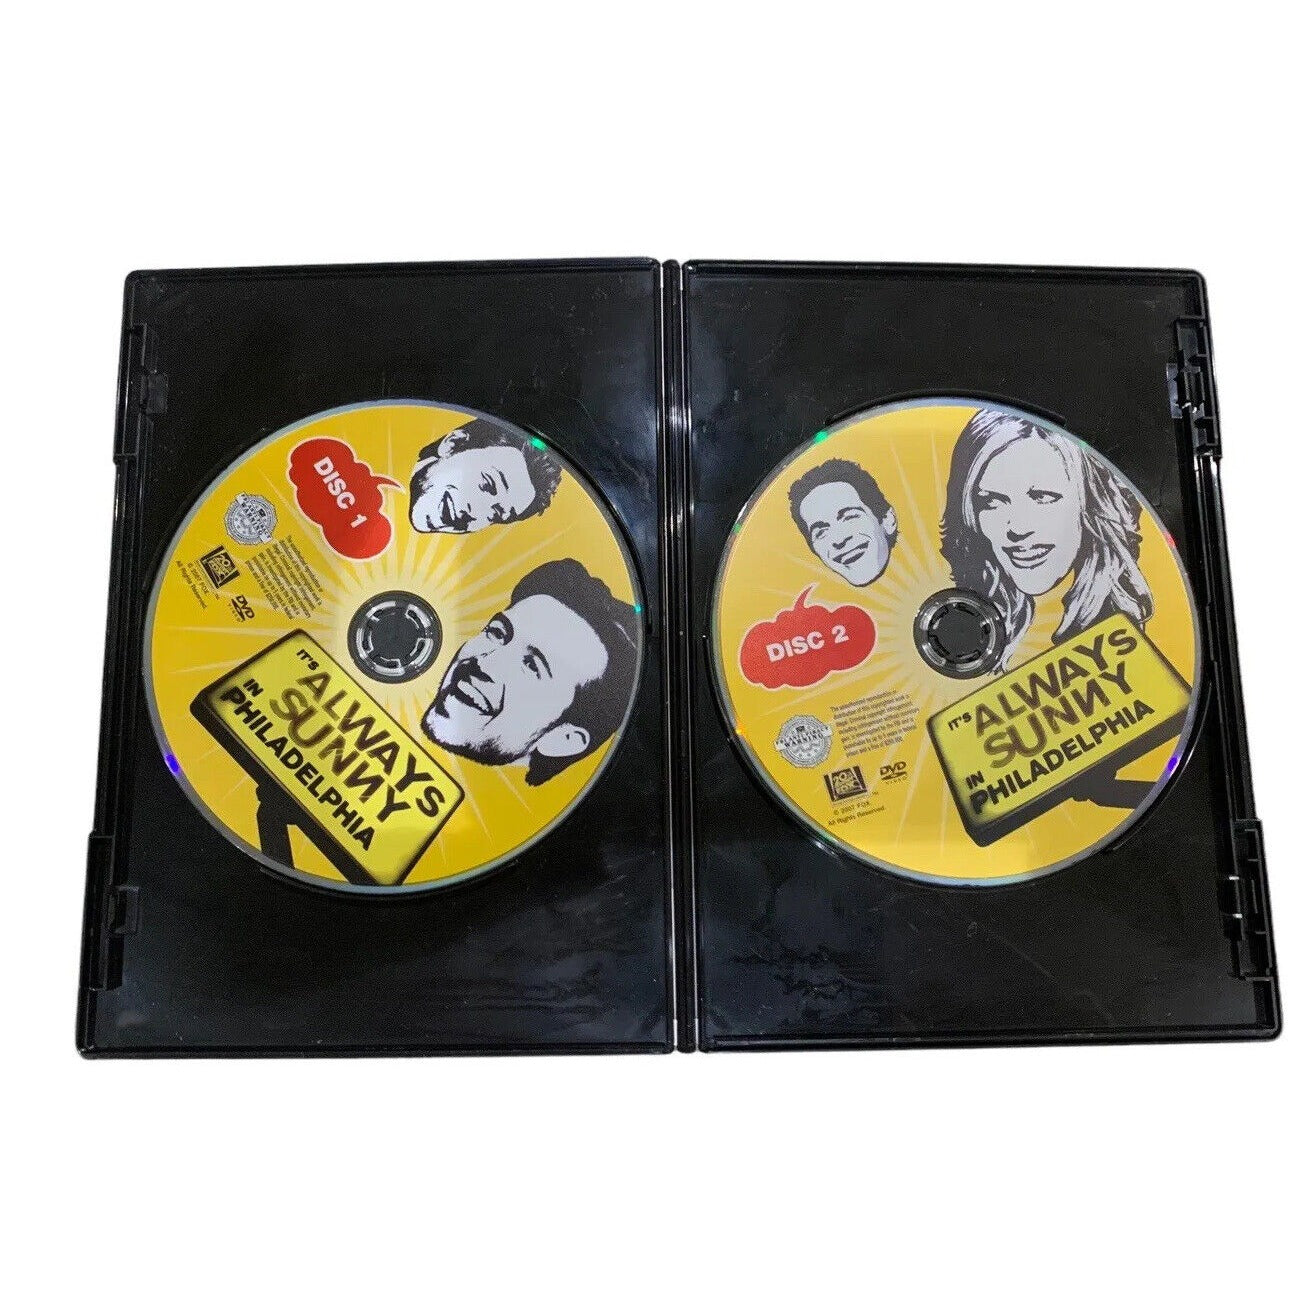 image of two dvds in the dvd case